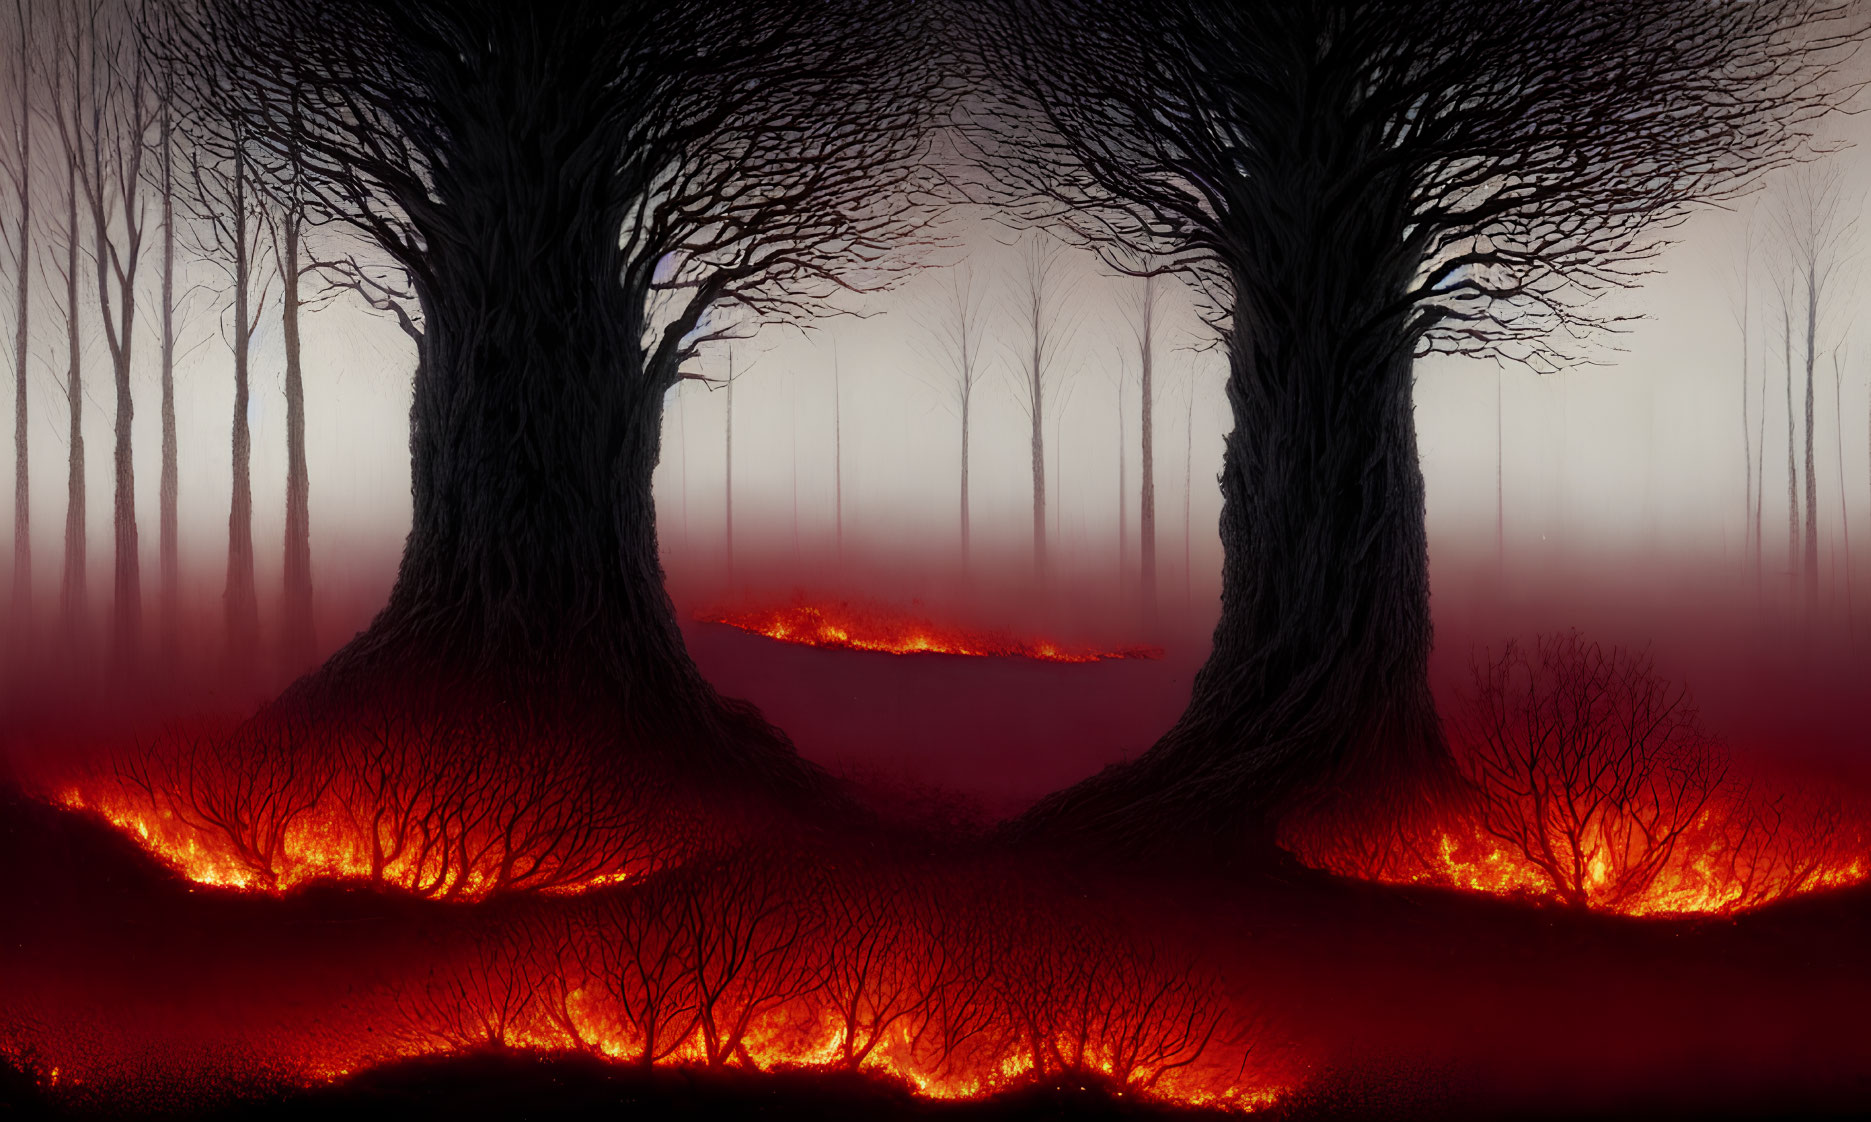 Mysterious forest with large trees, fog, cracked ground, and glowing lava